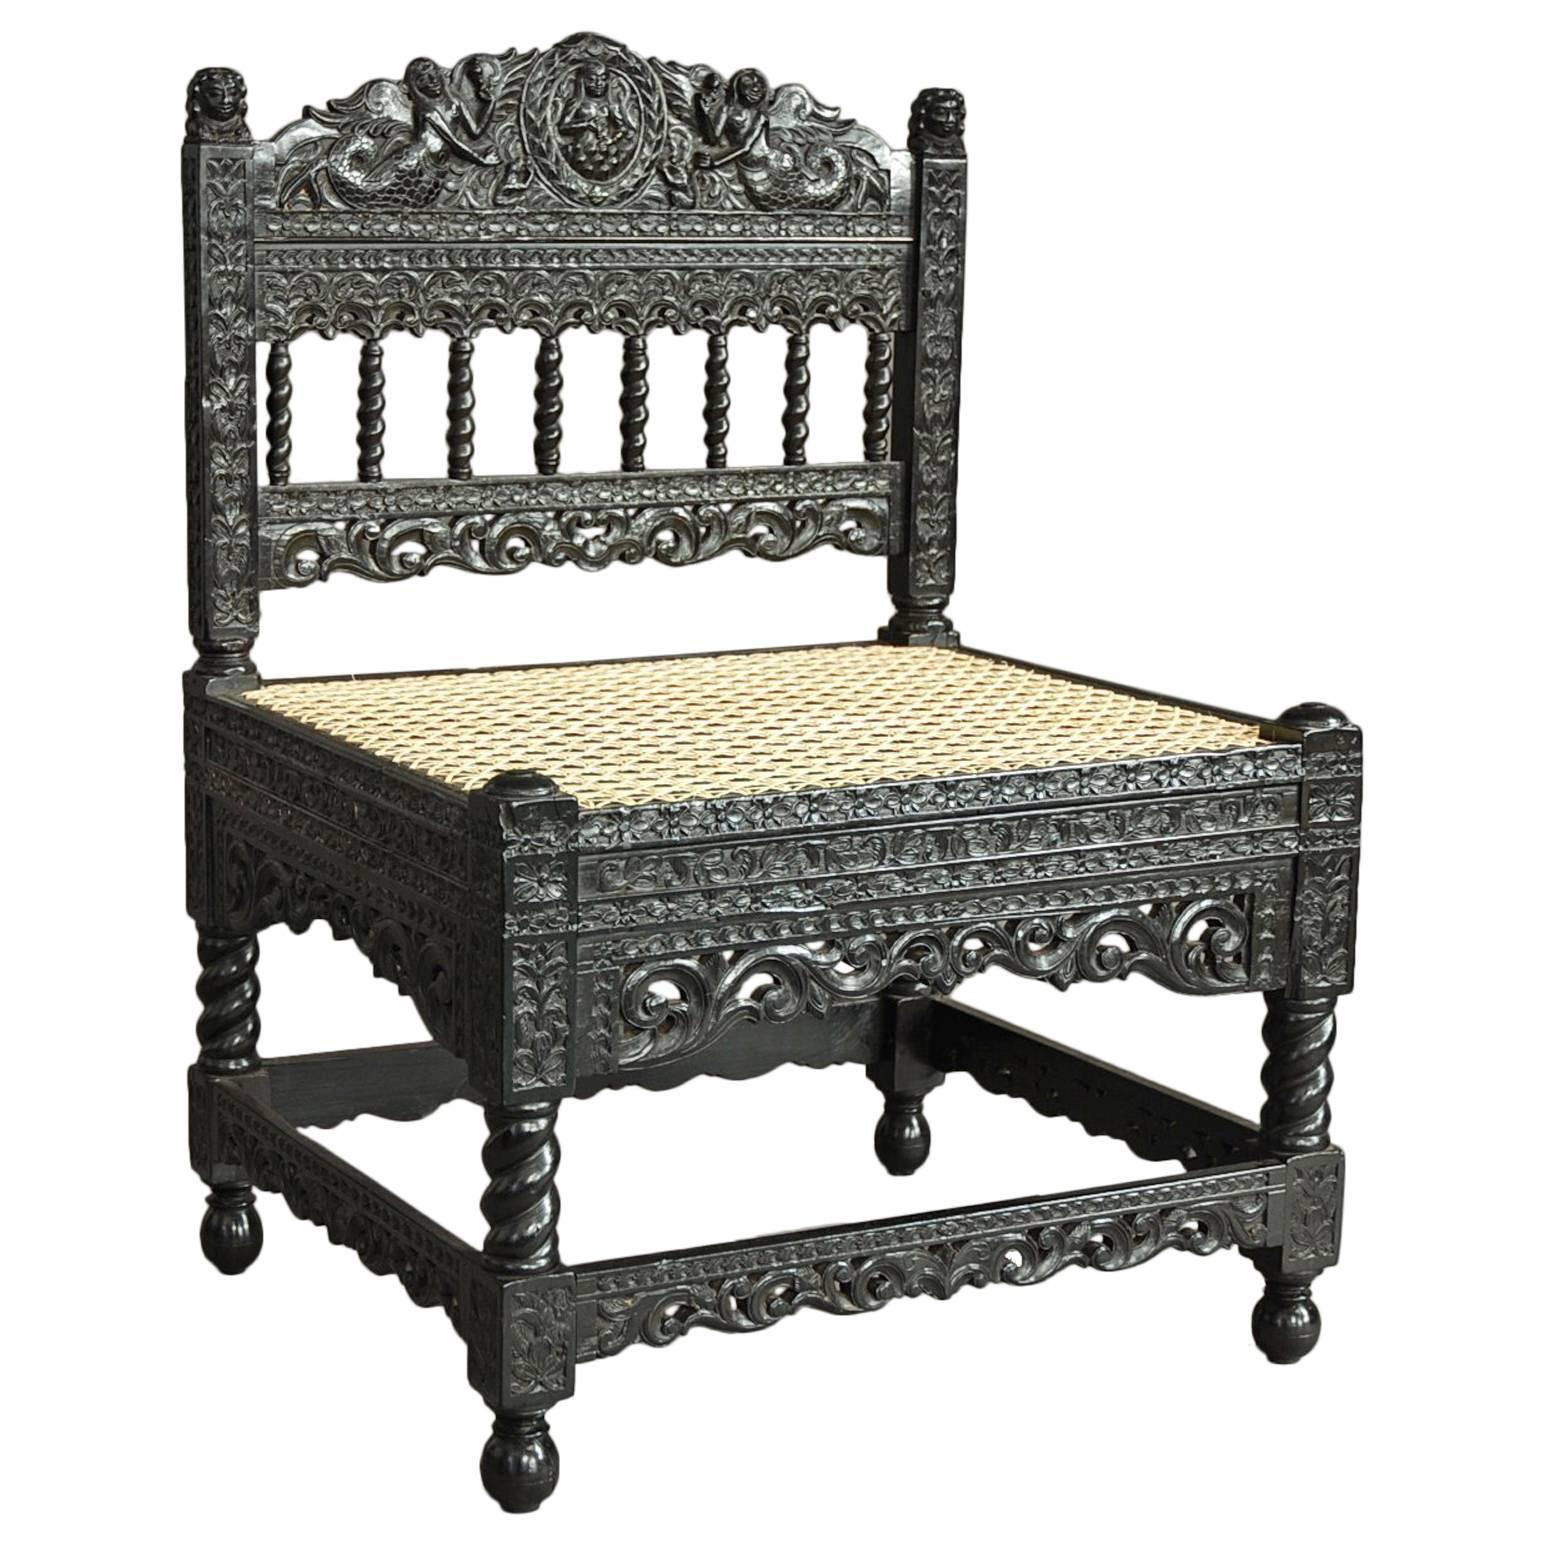 Superb Quality Late 17th Century Solid Ebony Low Chair